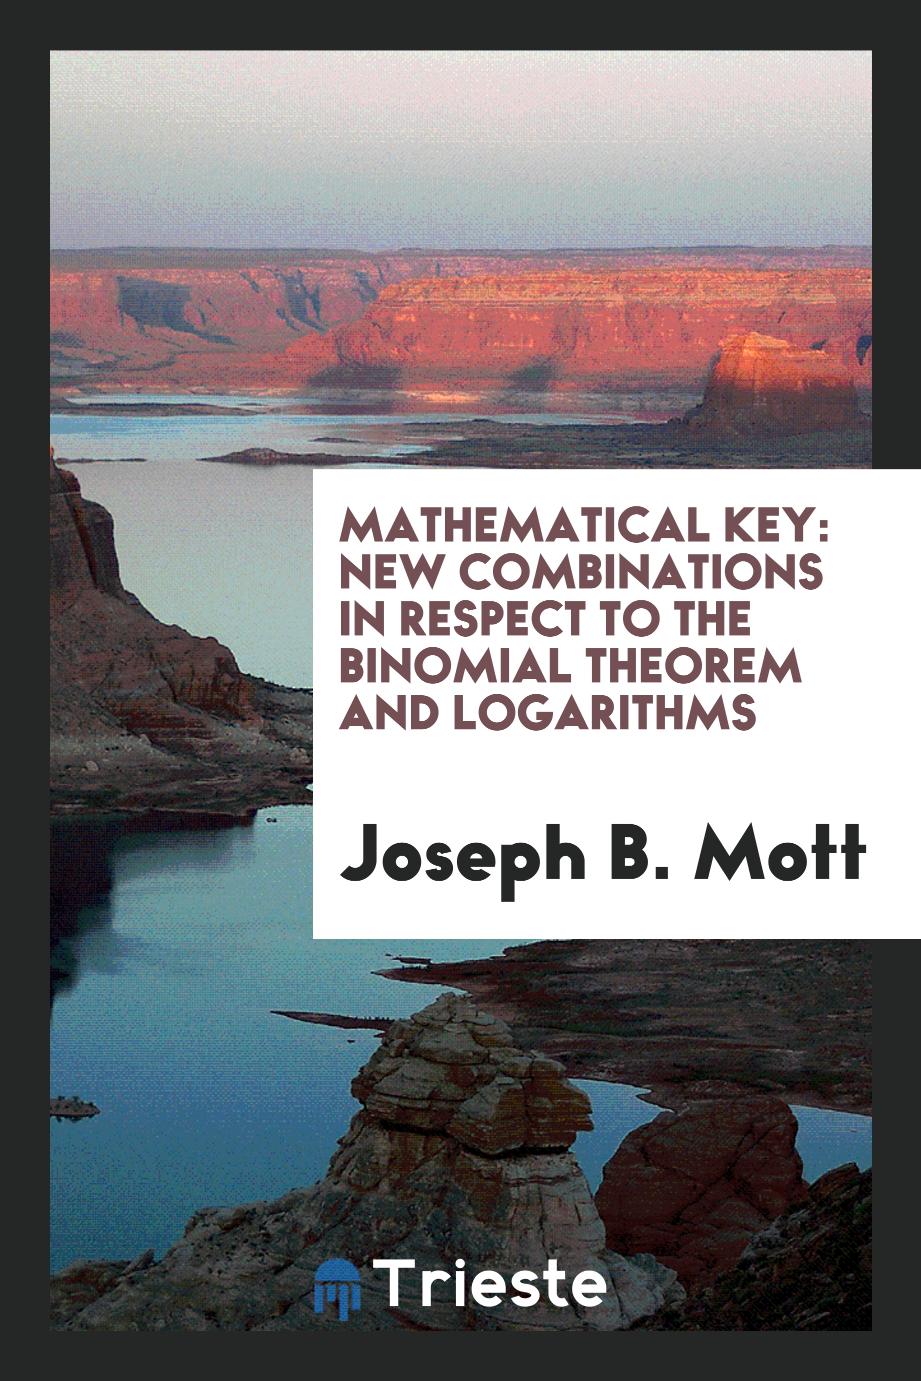 Mathematical Key: New Combinations in Respect to the Binomial Theorem and Logarithms